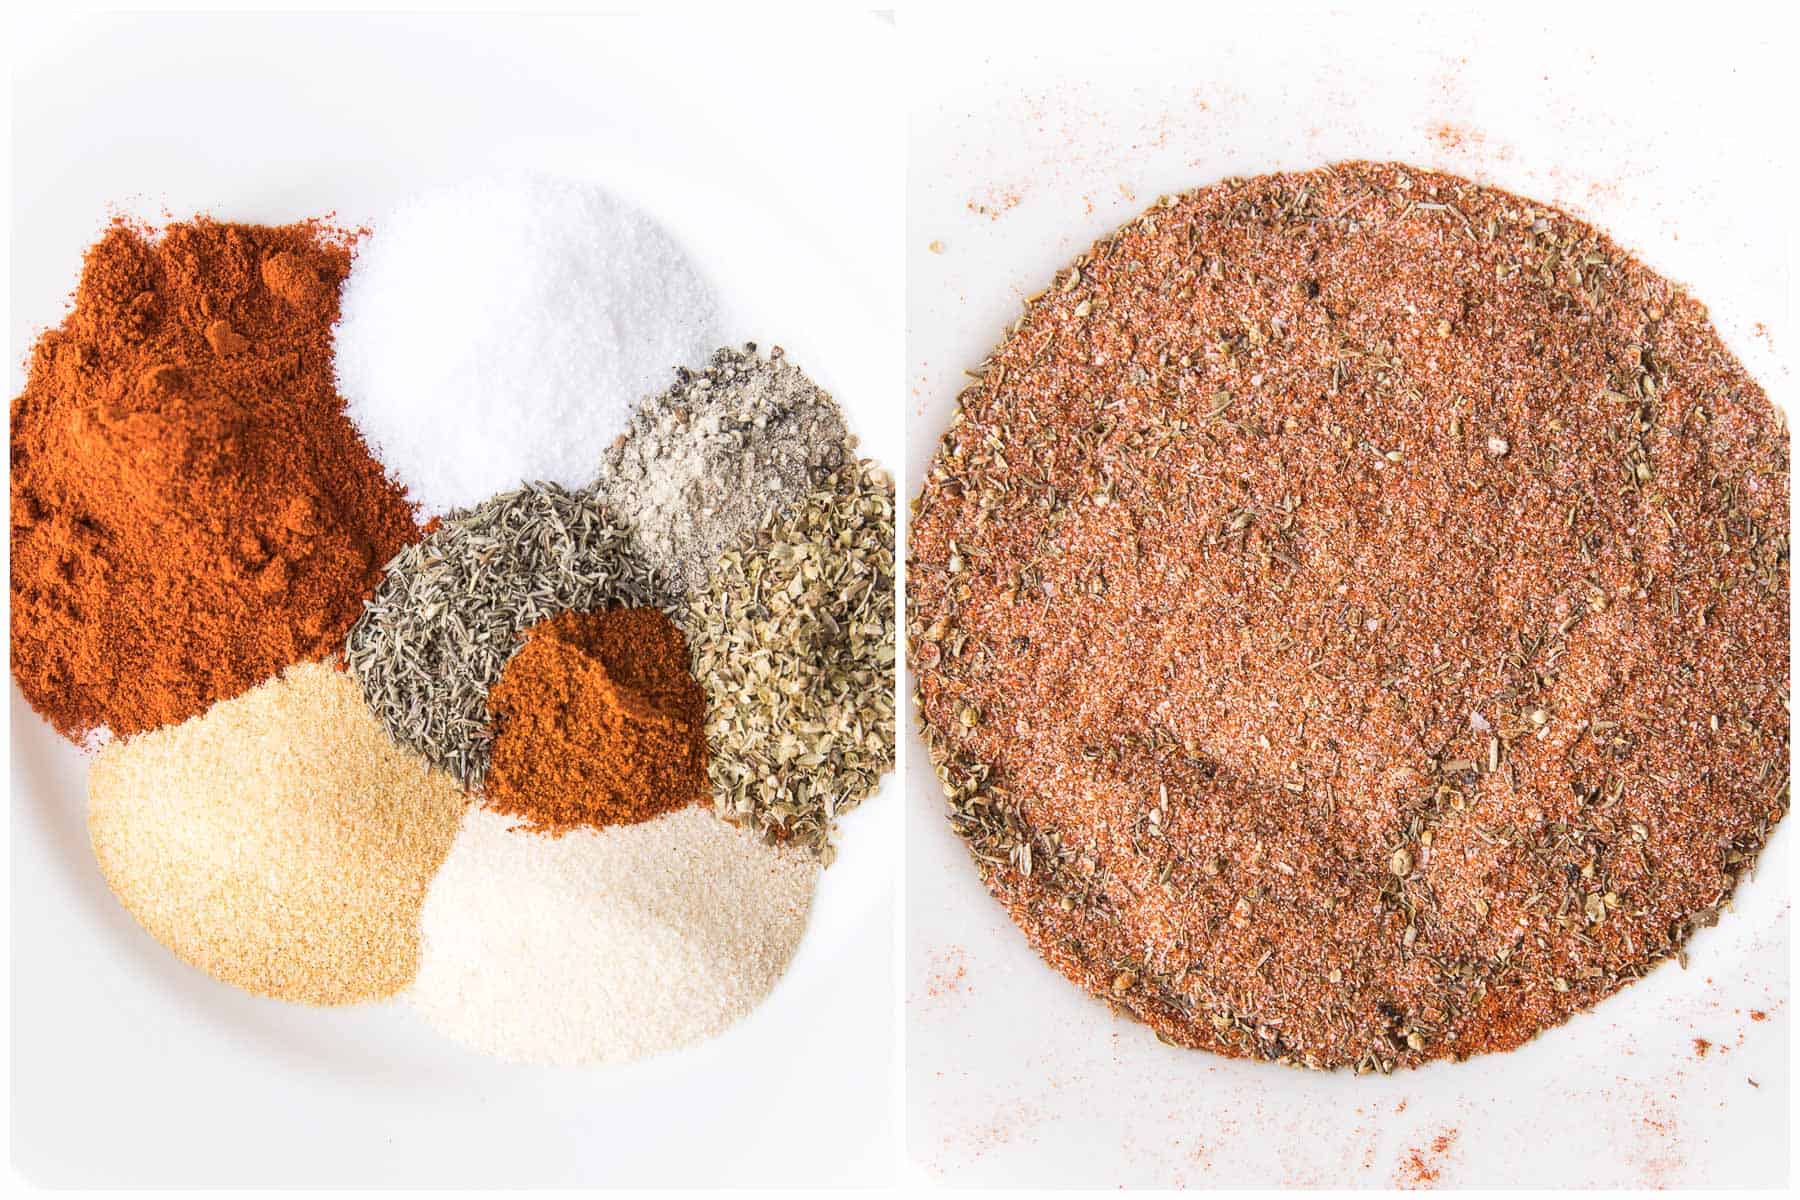 ingredients for cajun seasoning on a plate in a white background